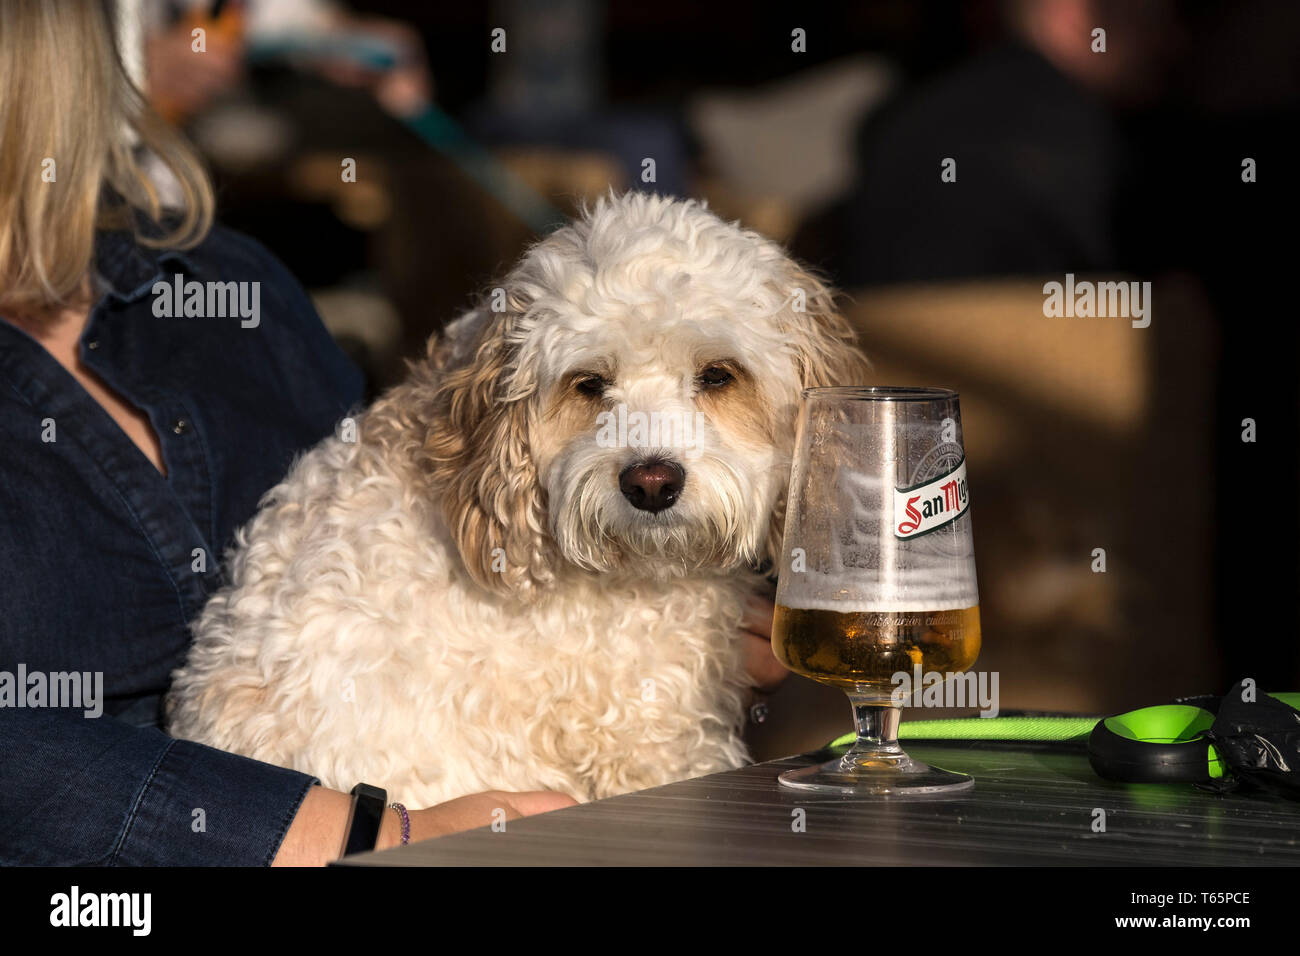 A drunk looking dog sitting at a table with a San Miguel beer. Stock Photo